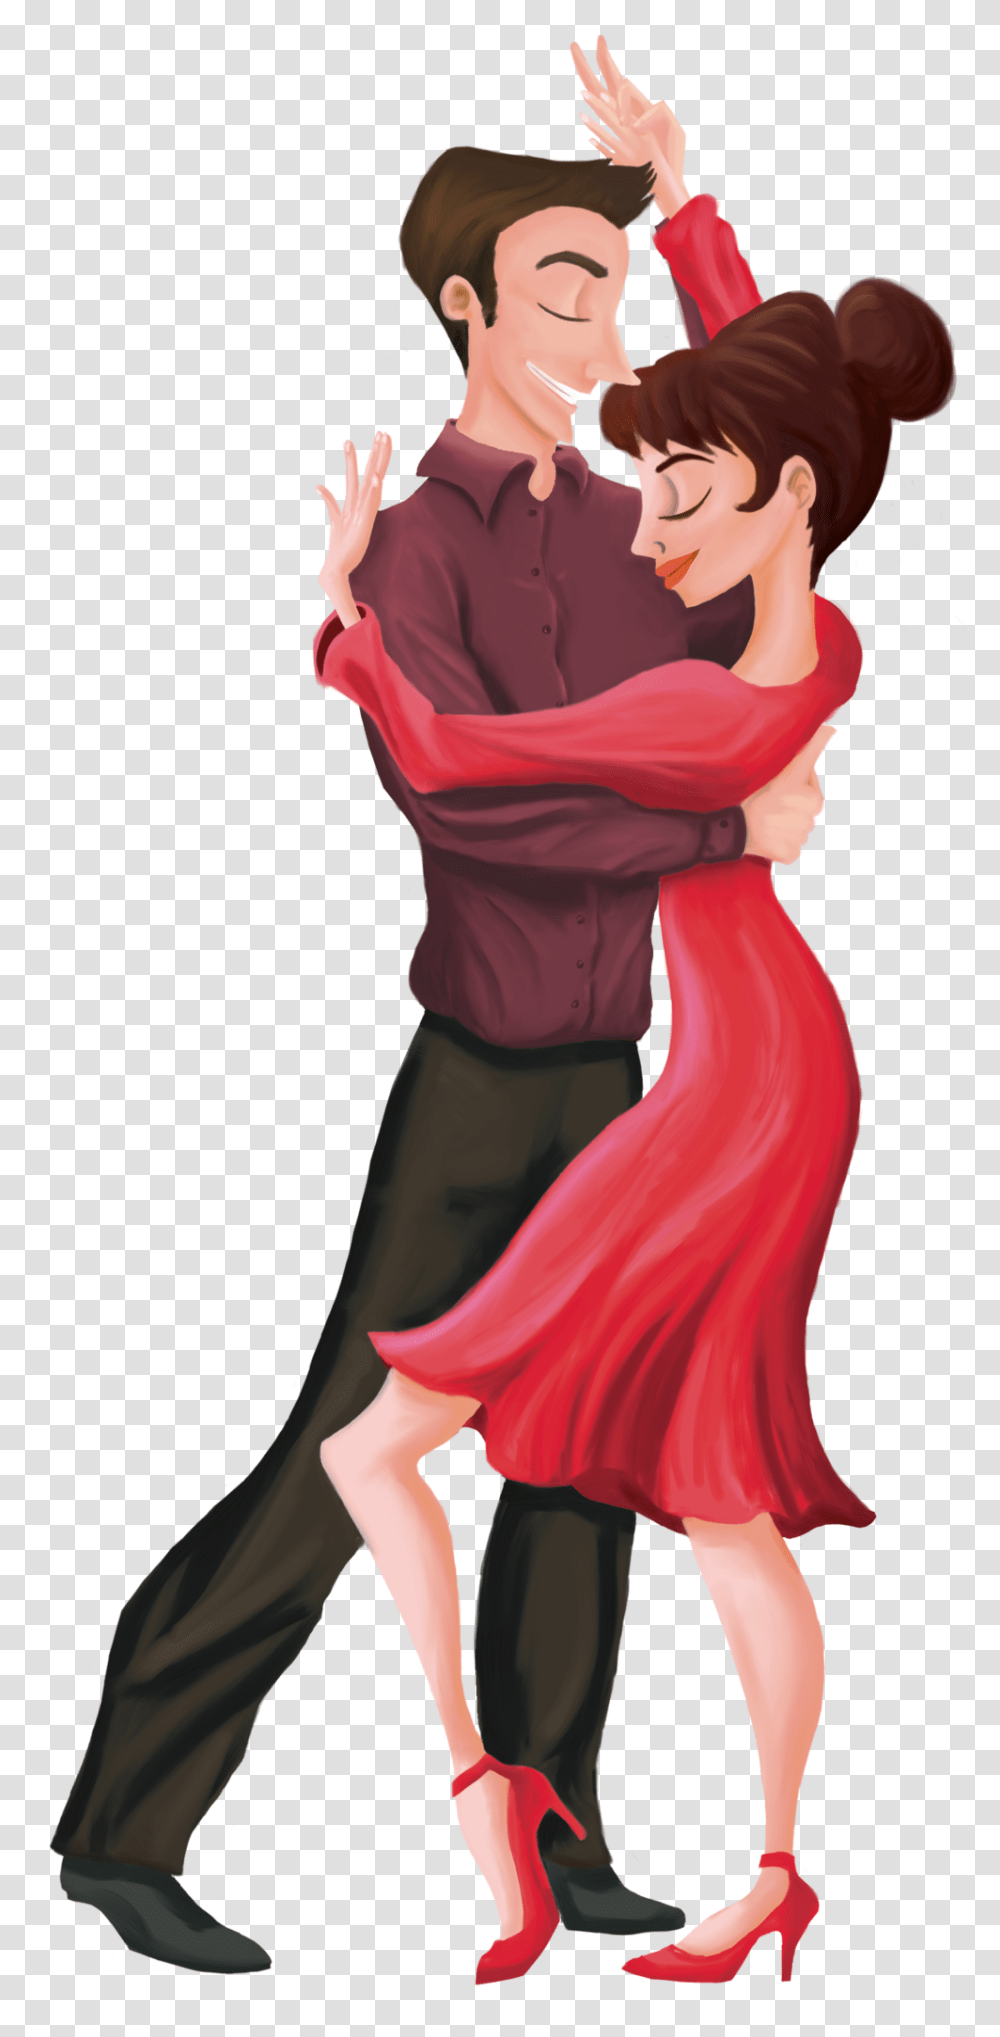 Couple 3 Numero Tango Download Cartoon, Dance Pose, Leisure Activities, Performer, Person Transparent Png